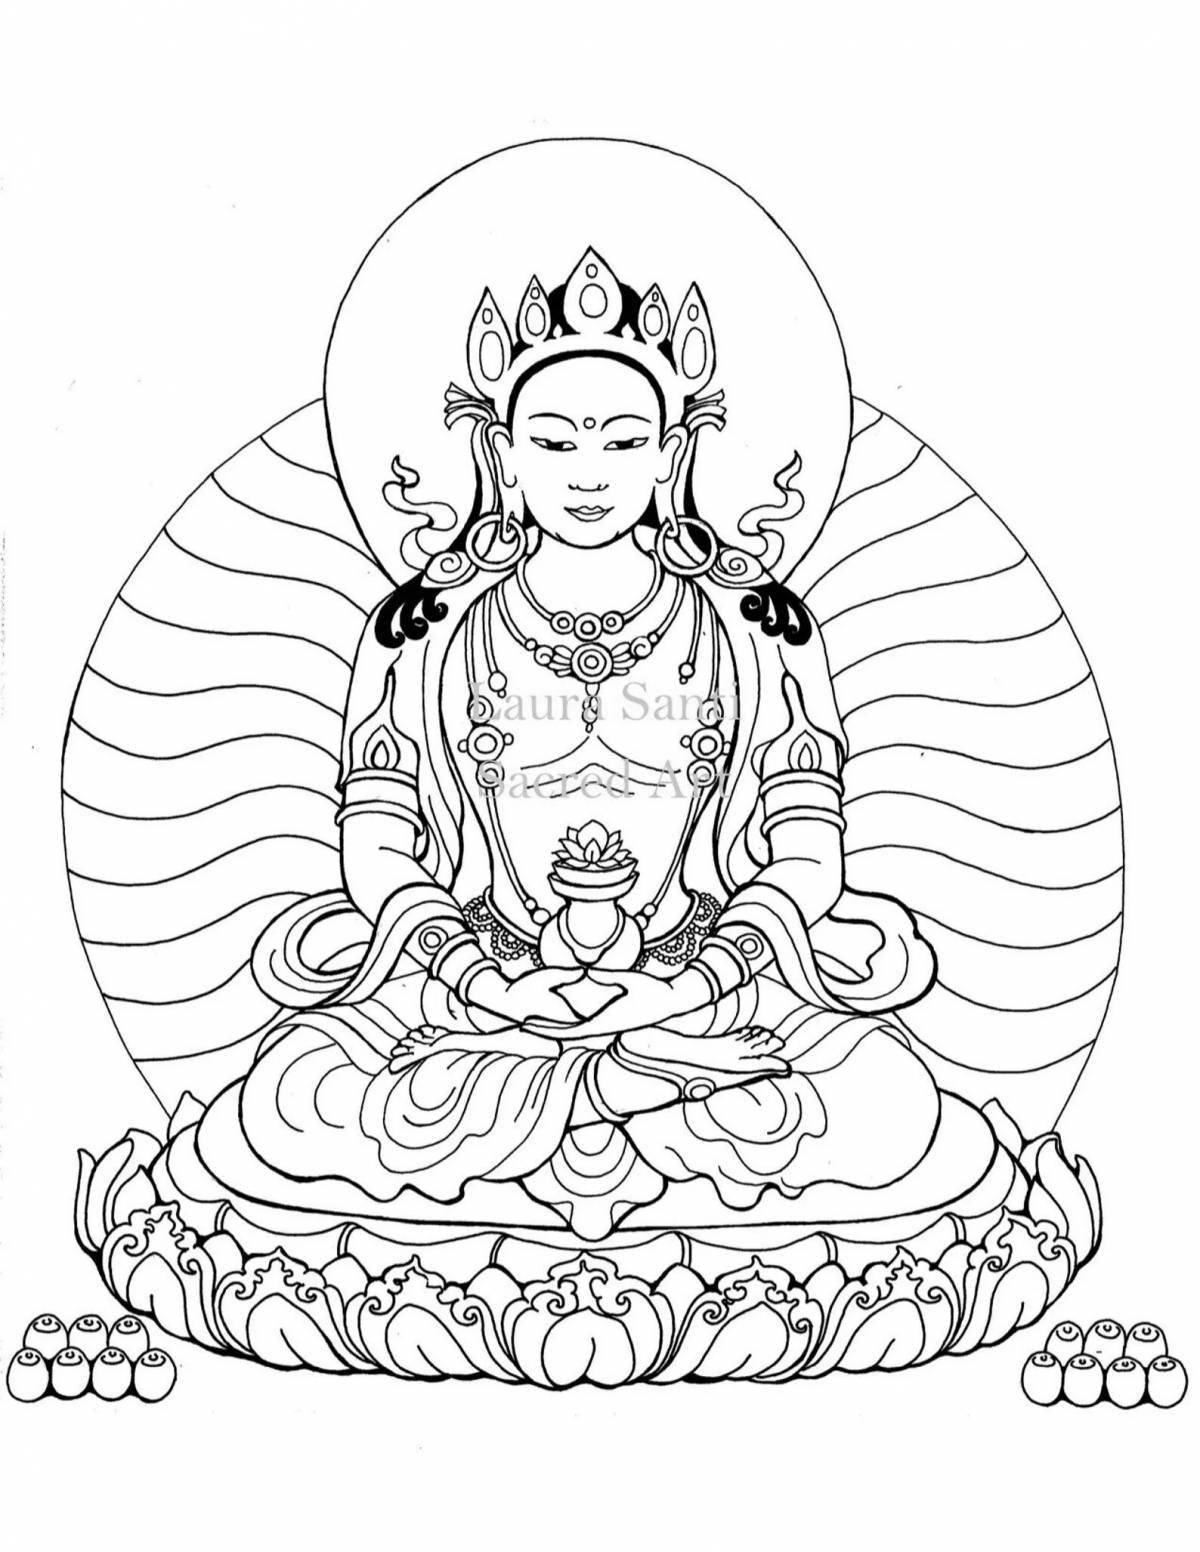 Buddhism inspirational coloring page